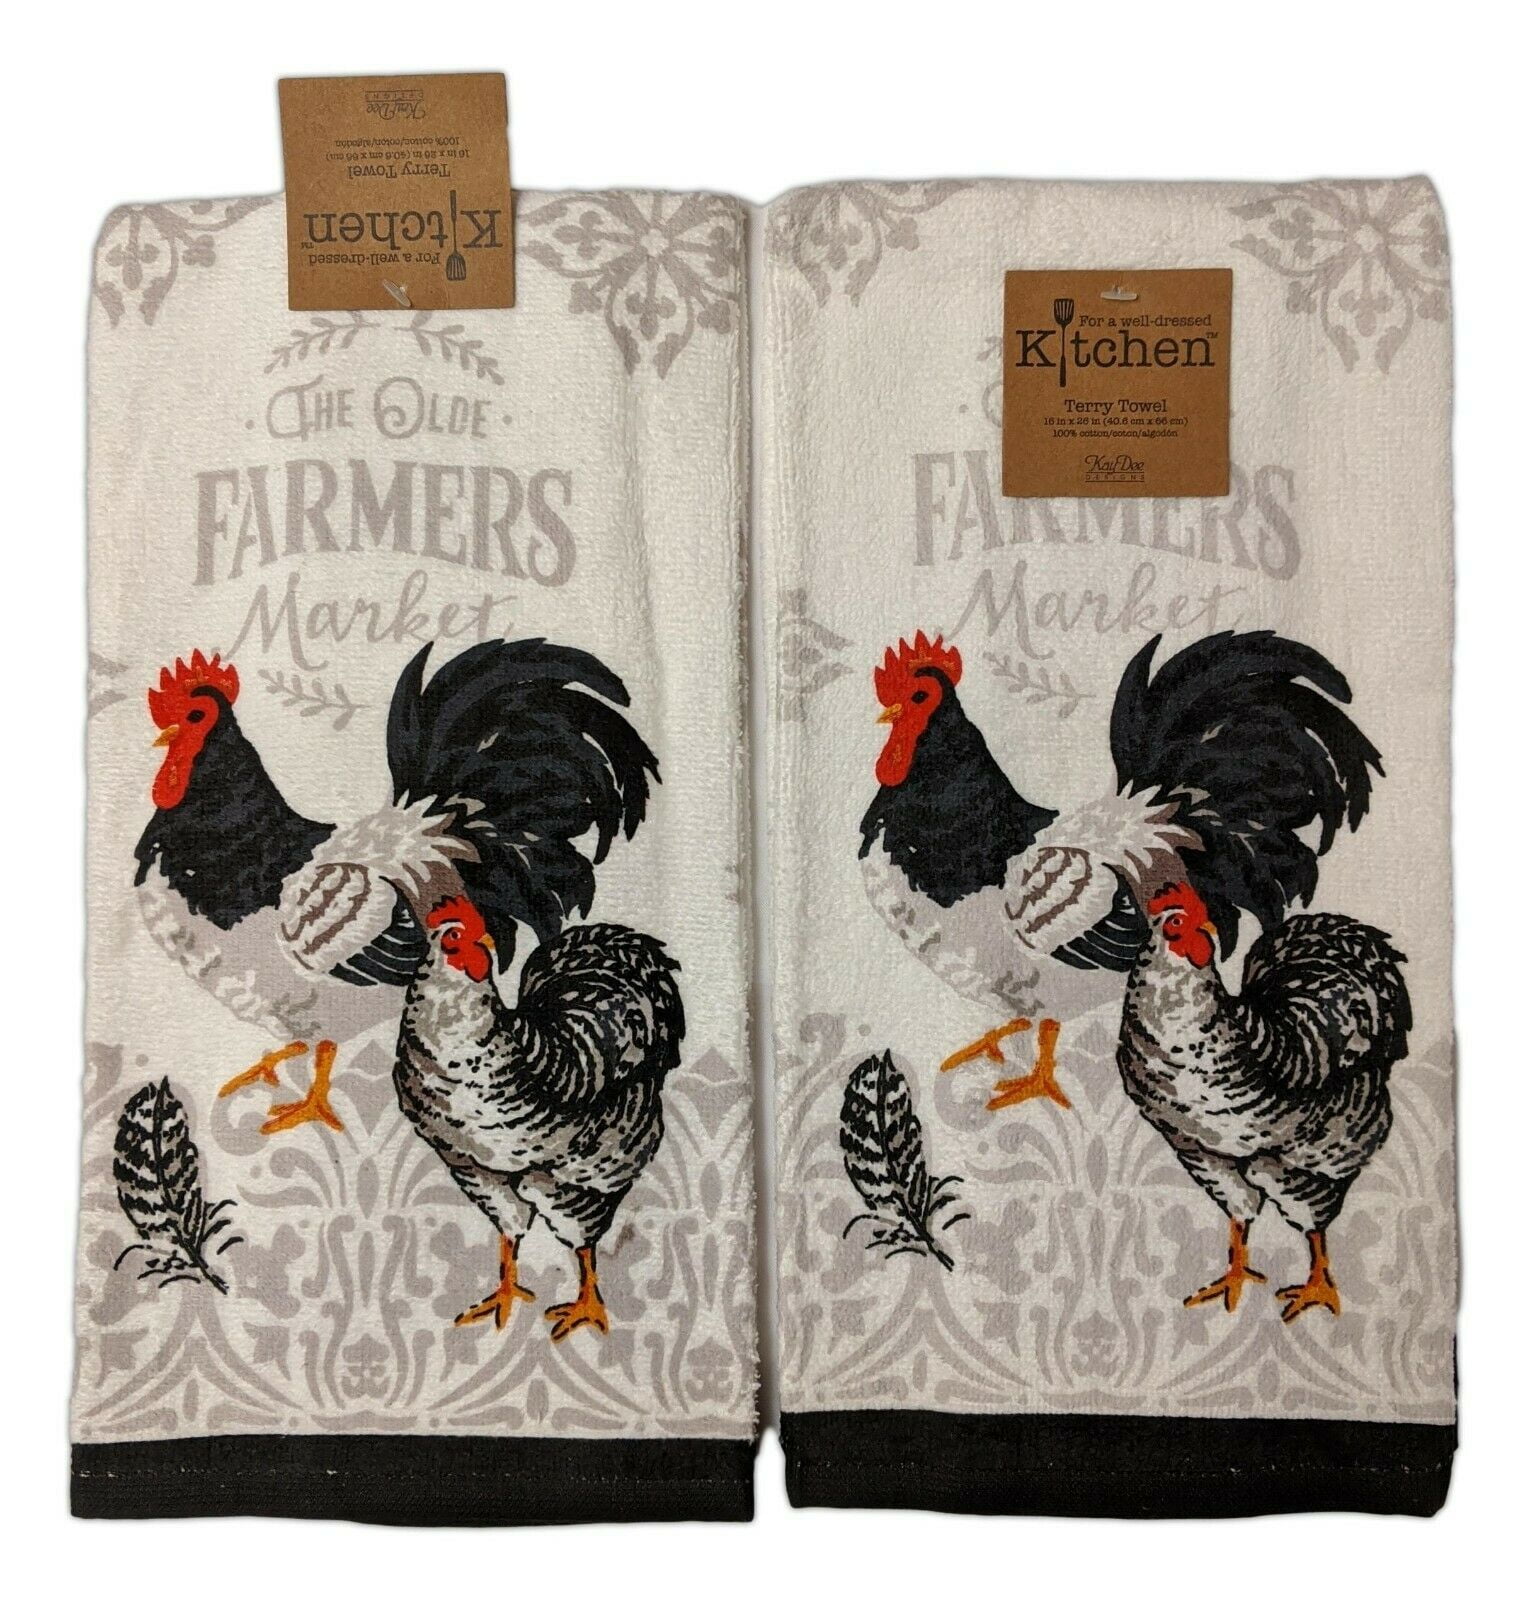 GRAIN & FEED 2 SAME PRINTED KITCHEN TOWELS AM or GE 15" x 25" BLACK ROOSTER 